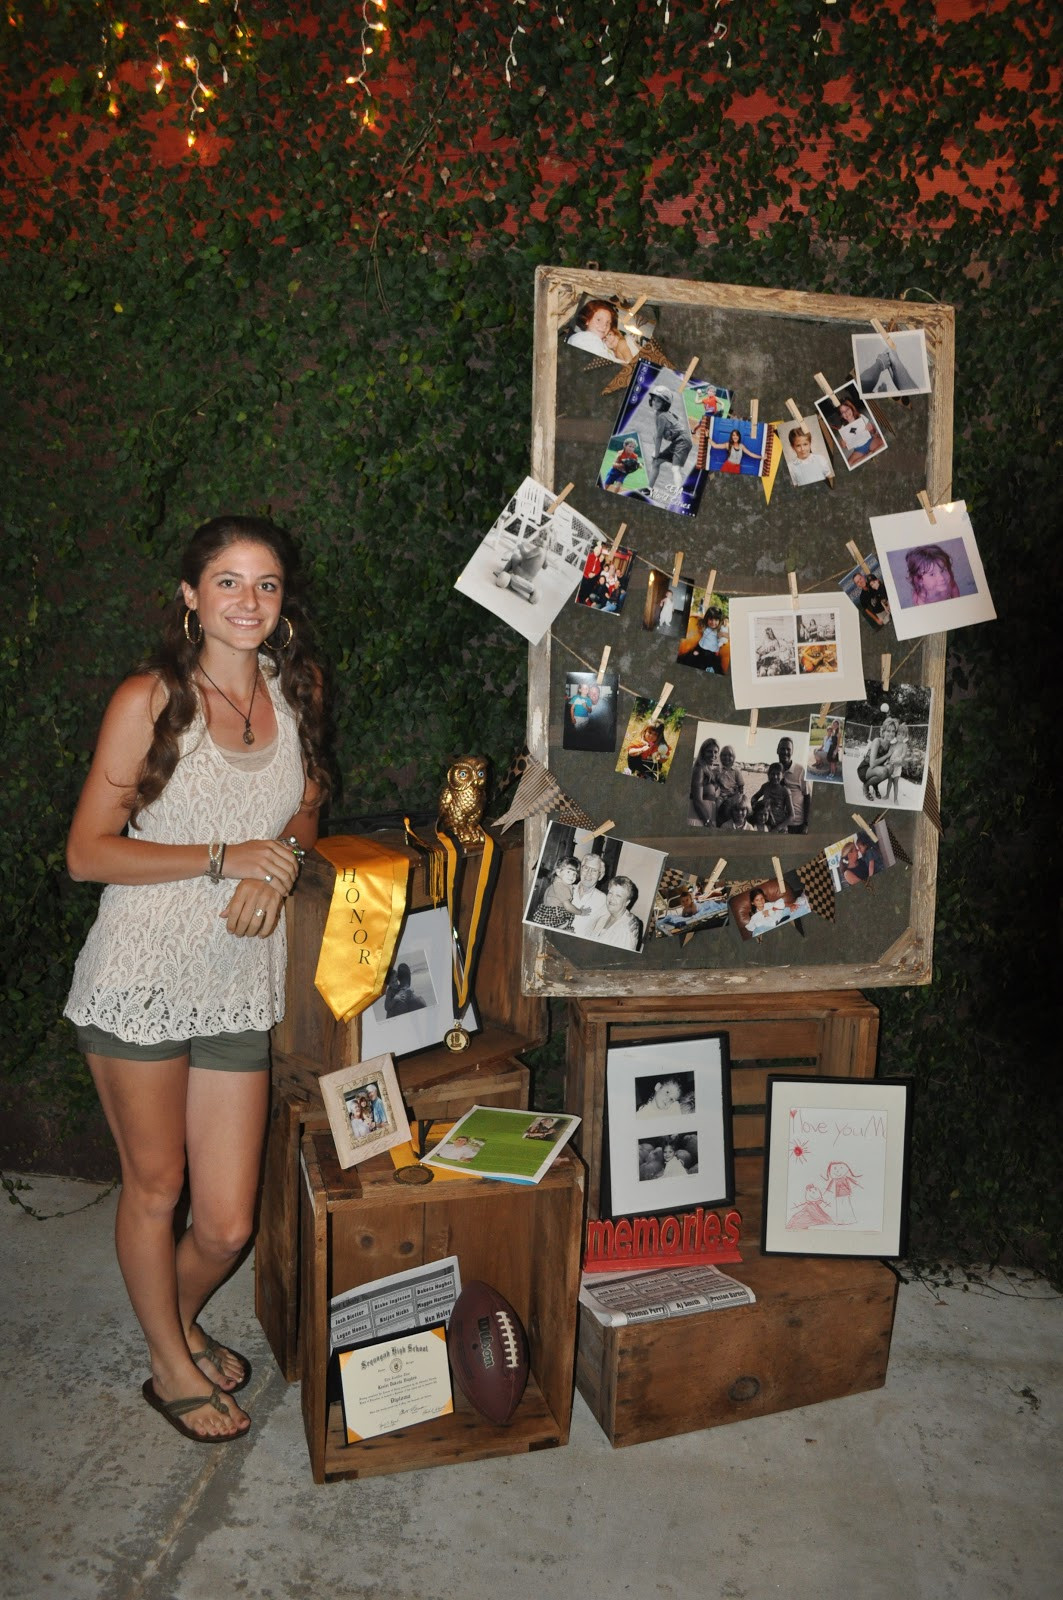 Graduation Party Picture Display Ideas
 The Best Ideas for Graduation Party Picture Display Ideas